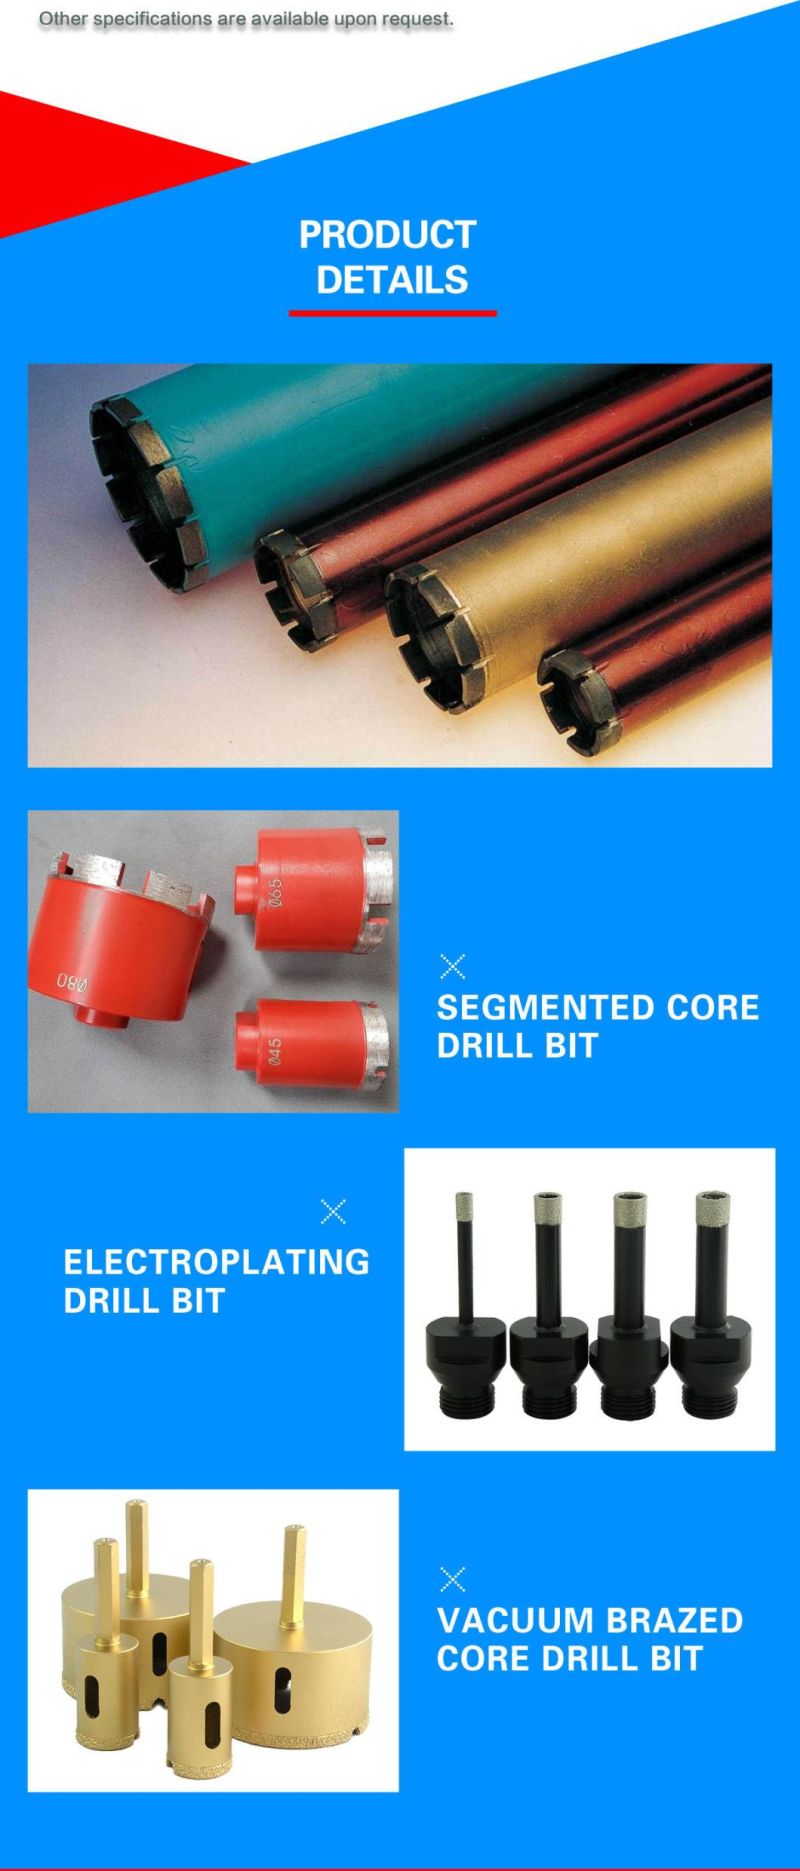 30*M14 Coring Concrete Electroplated Core Drill Bit Reviews for Marble Countertop